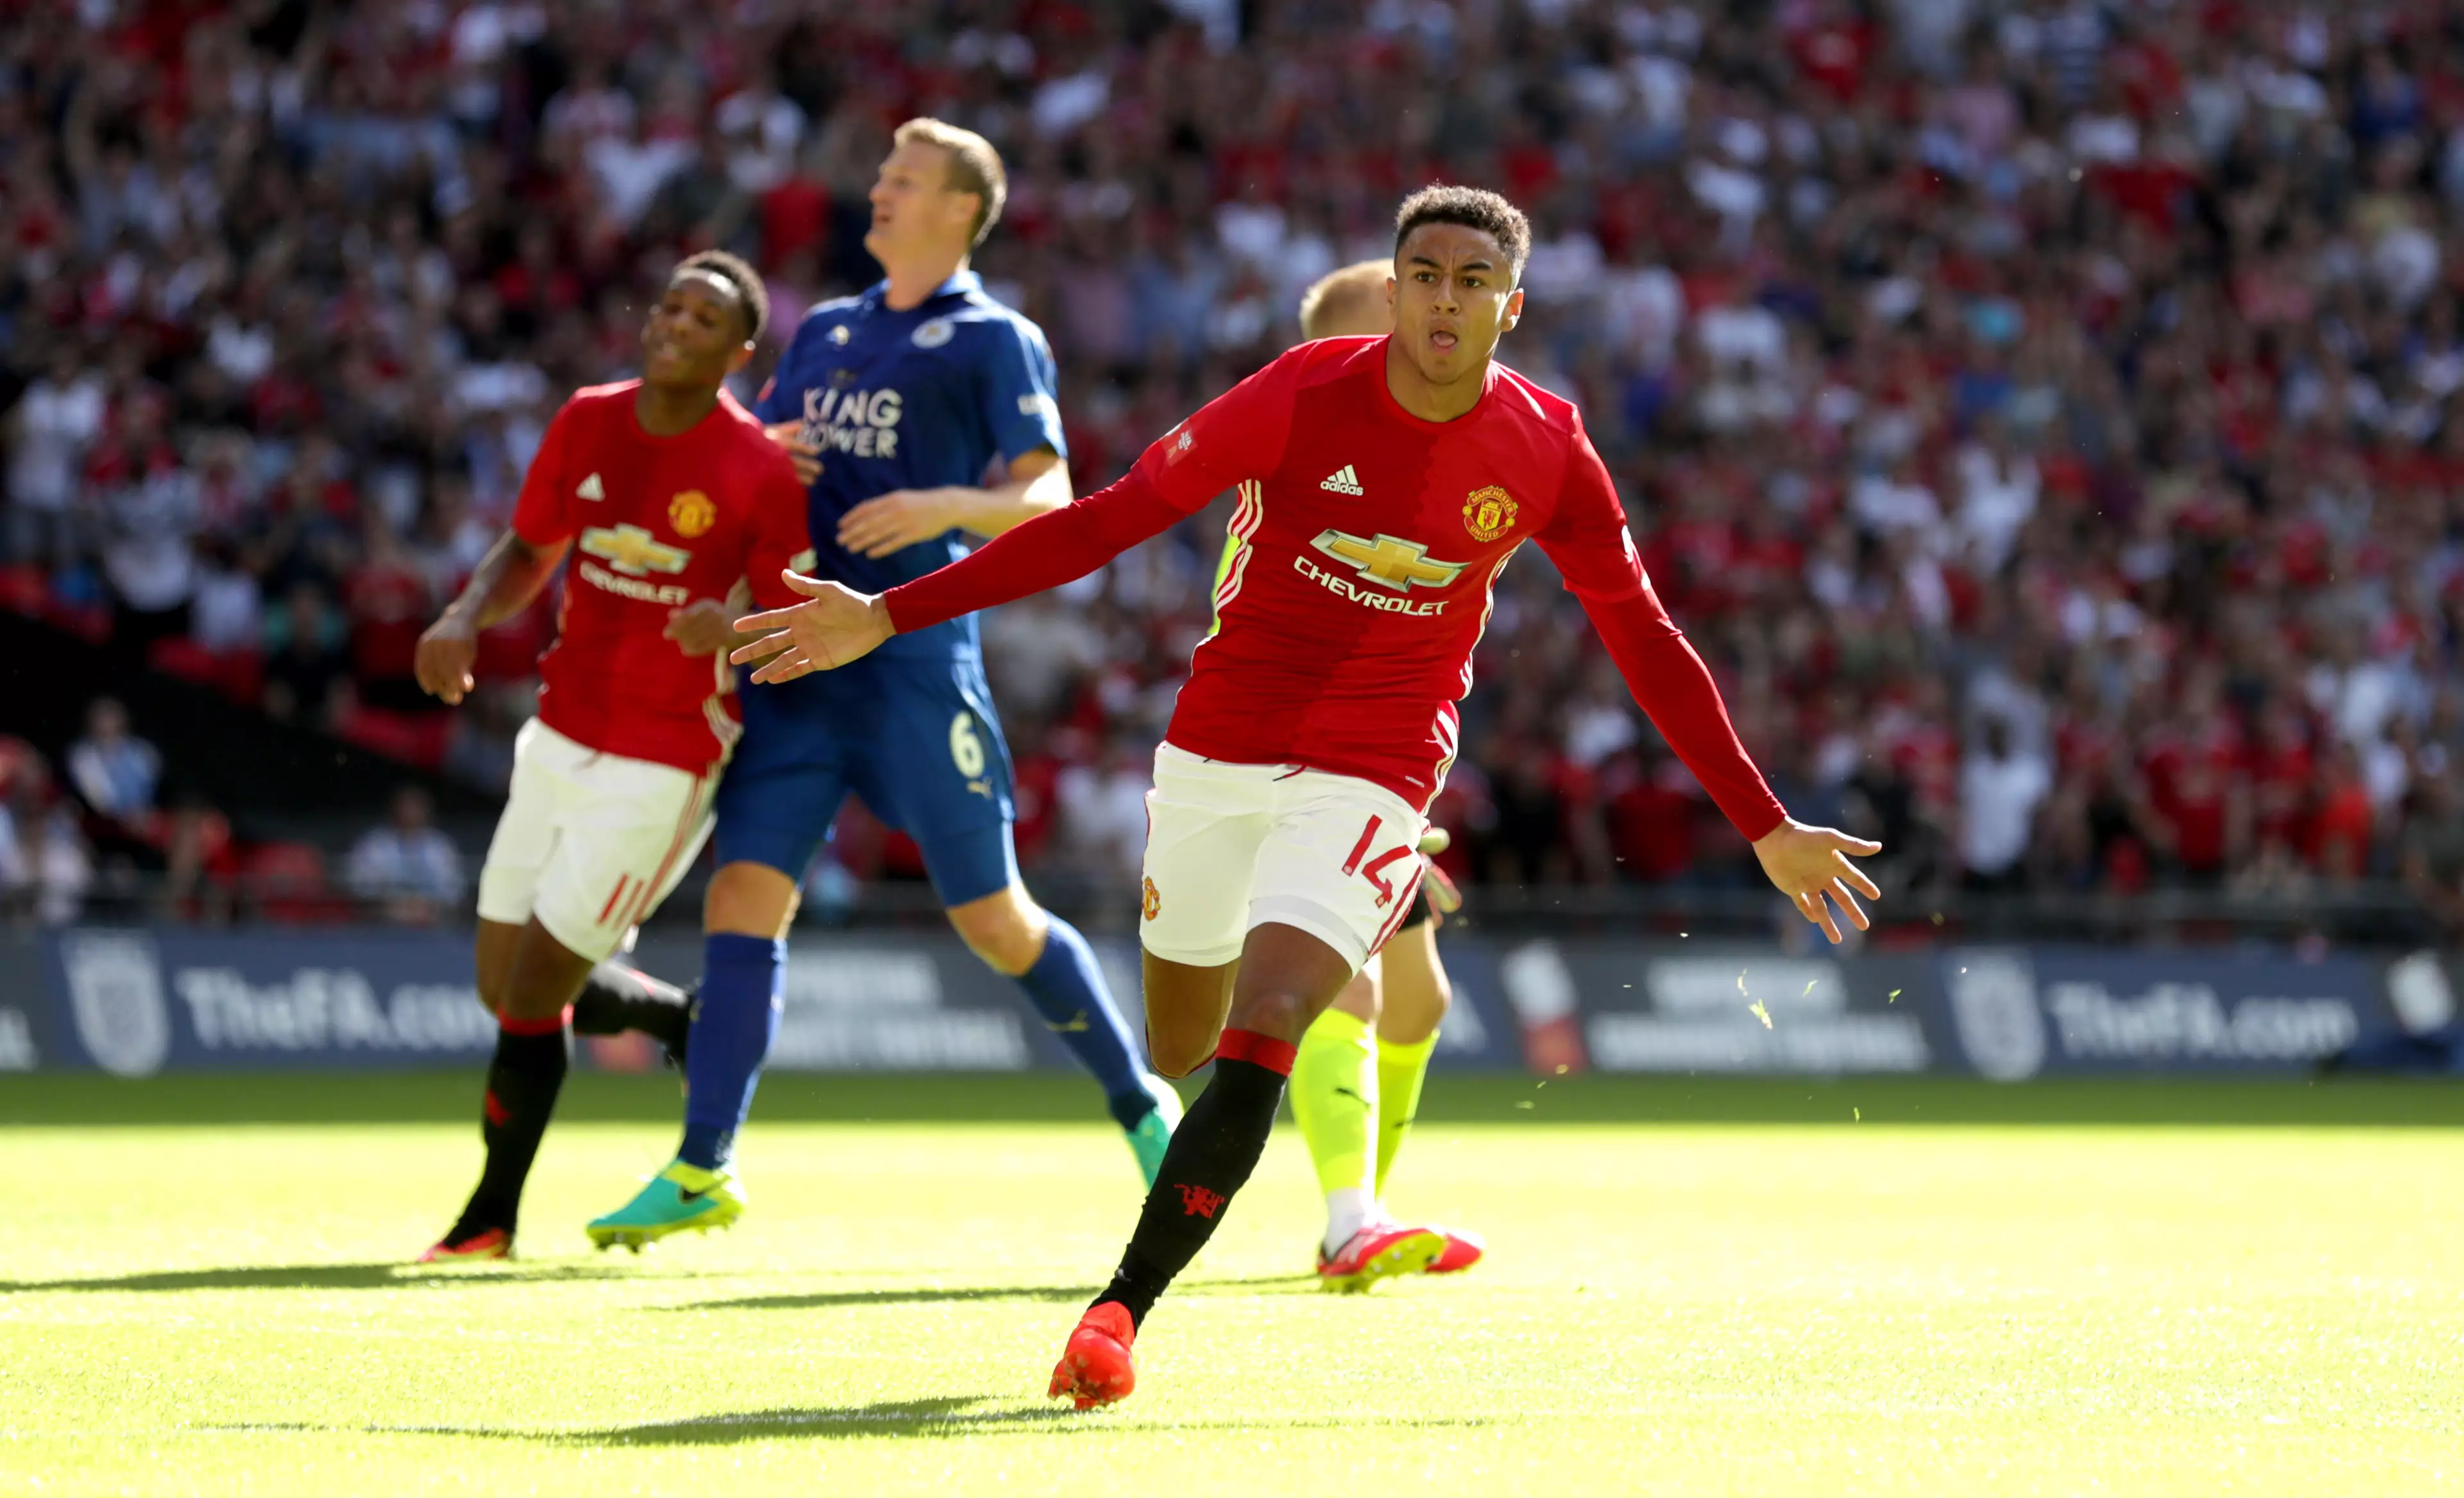 WATCH: Jesse Lingard Scores Absolutely Stunning Solo Goal In Community Shield